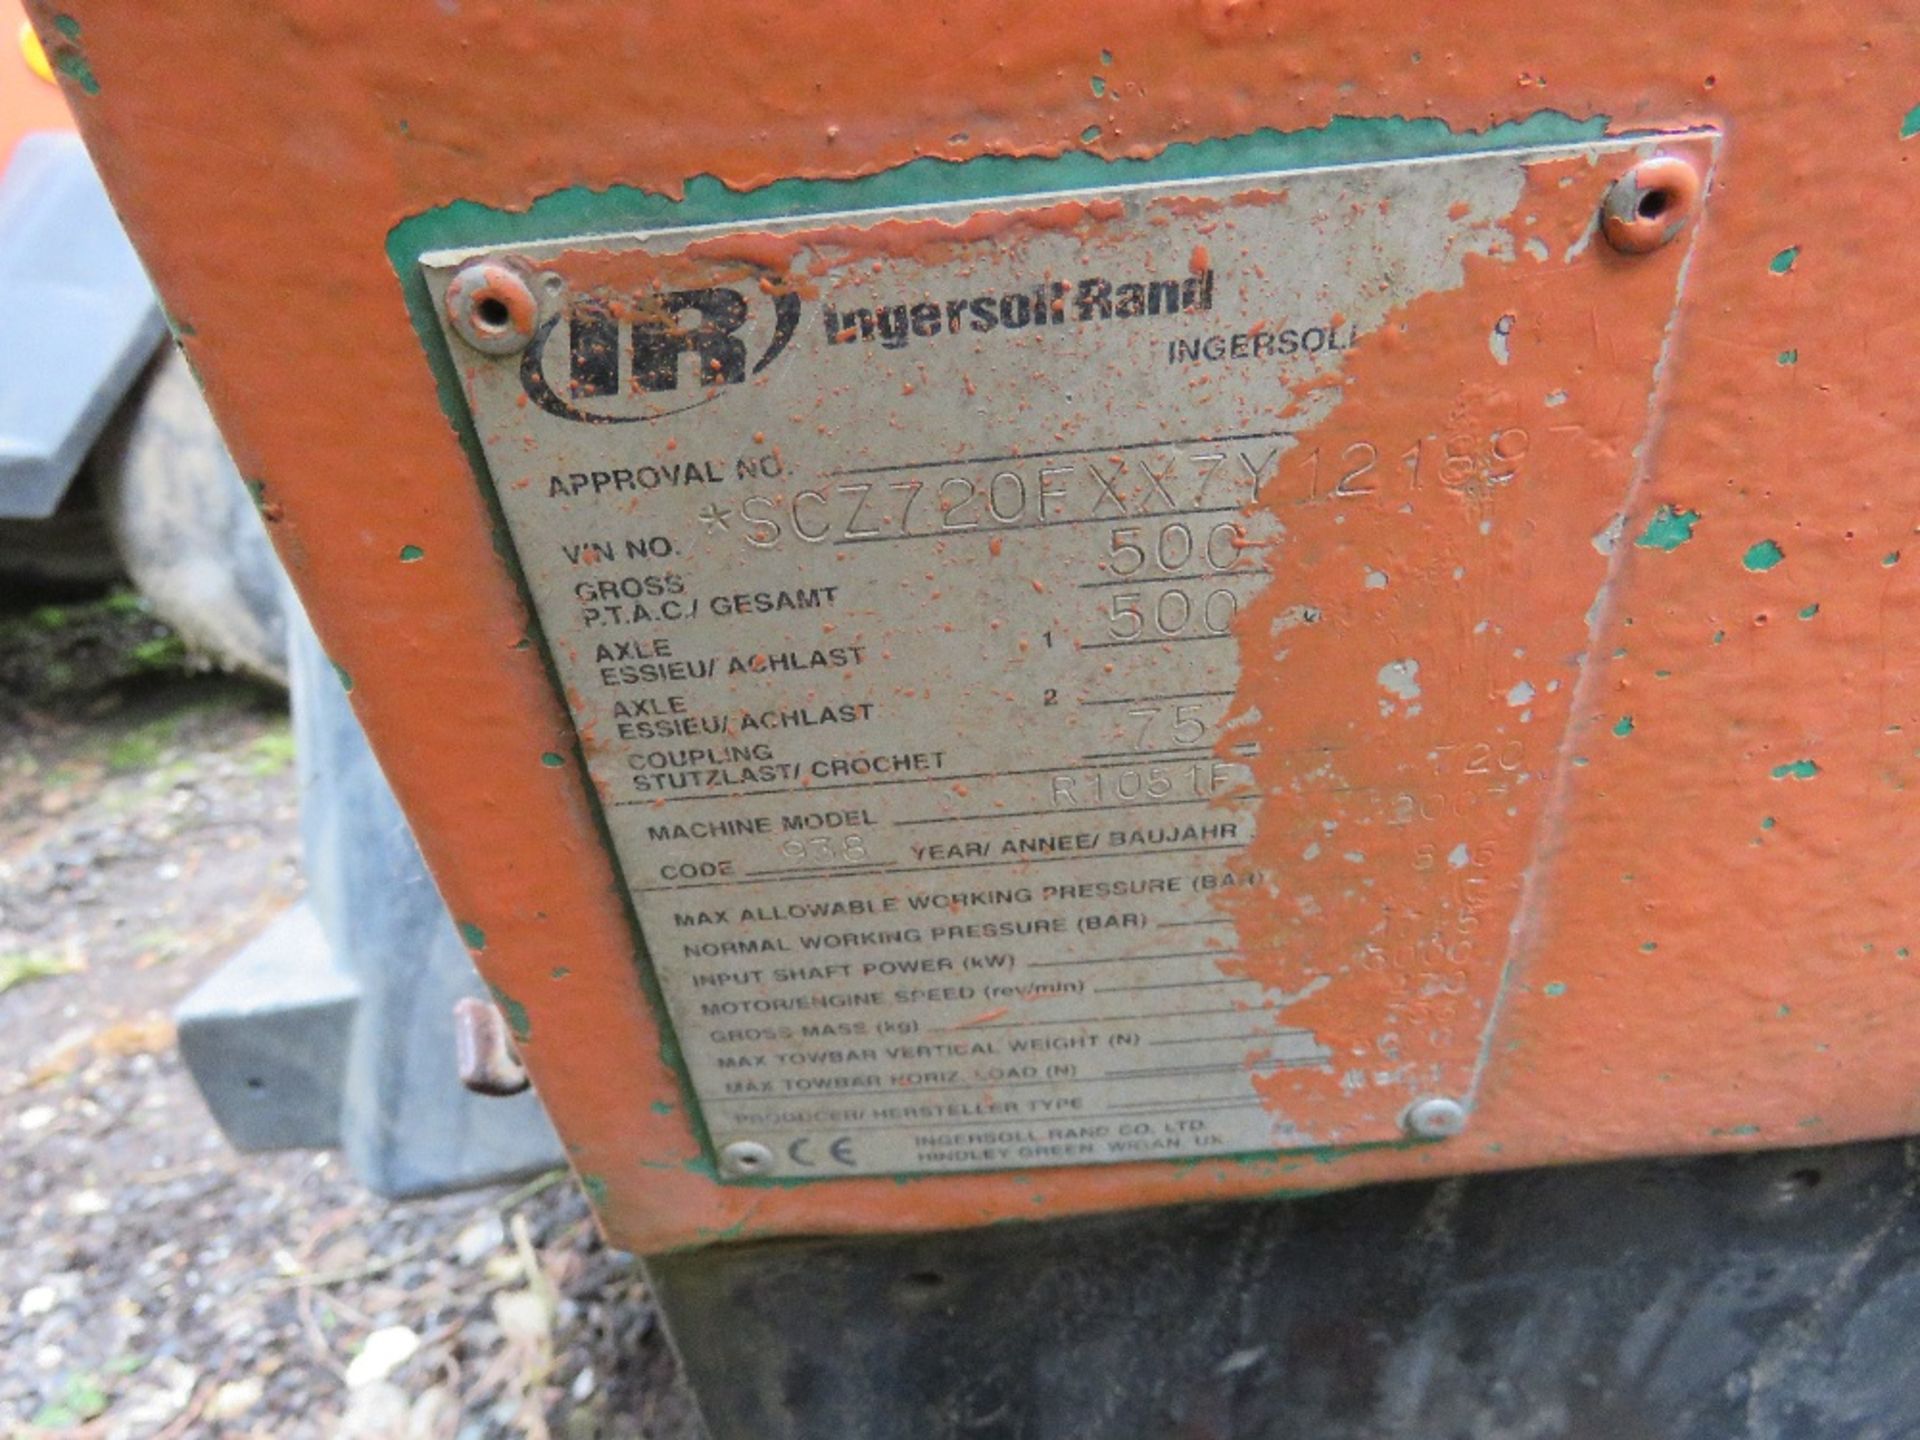 INGERSOLL RAND 720 TOWED ROAD COMPRESSOR. KUBOTA ENGINE. BEEN IN LONG TERM STORAGE, UNTESTED, CONDIT - Image 6 of 10